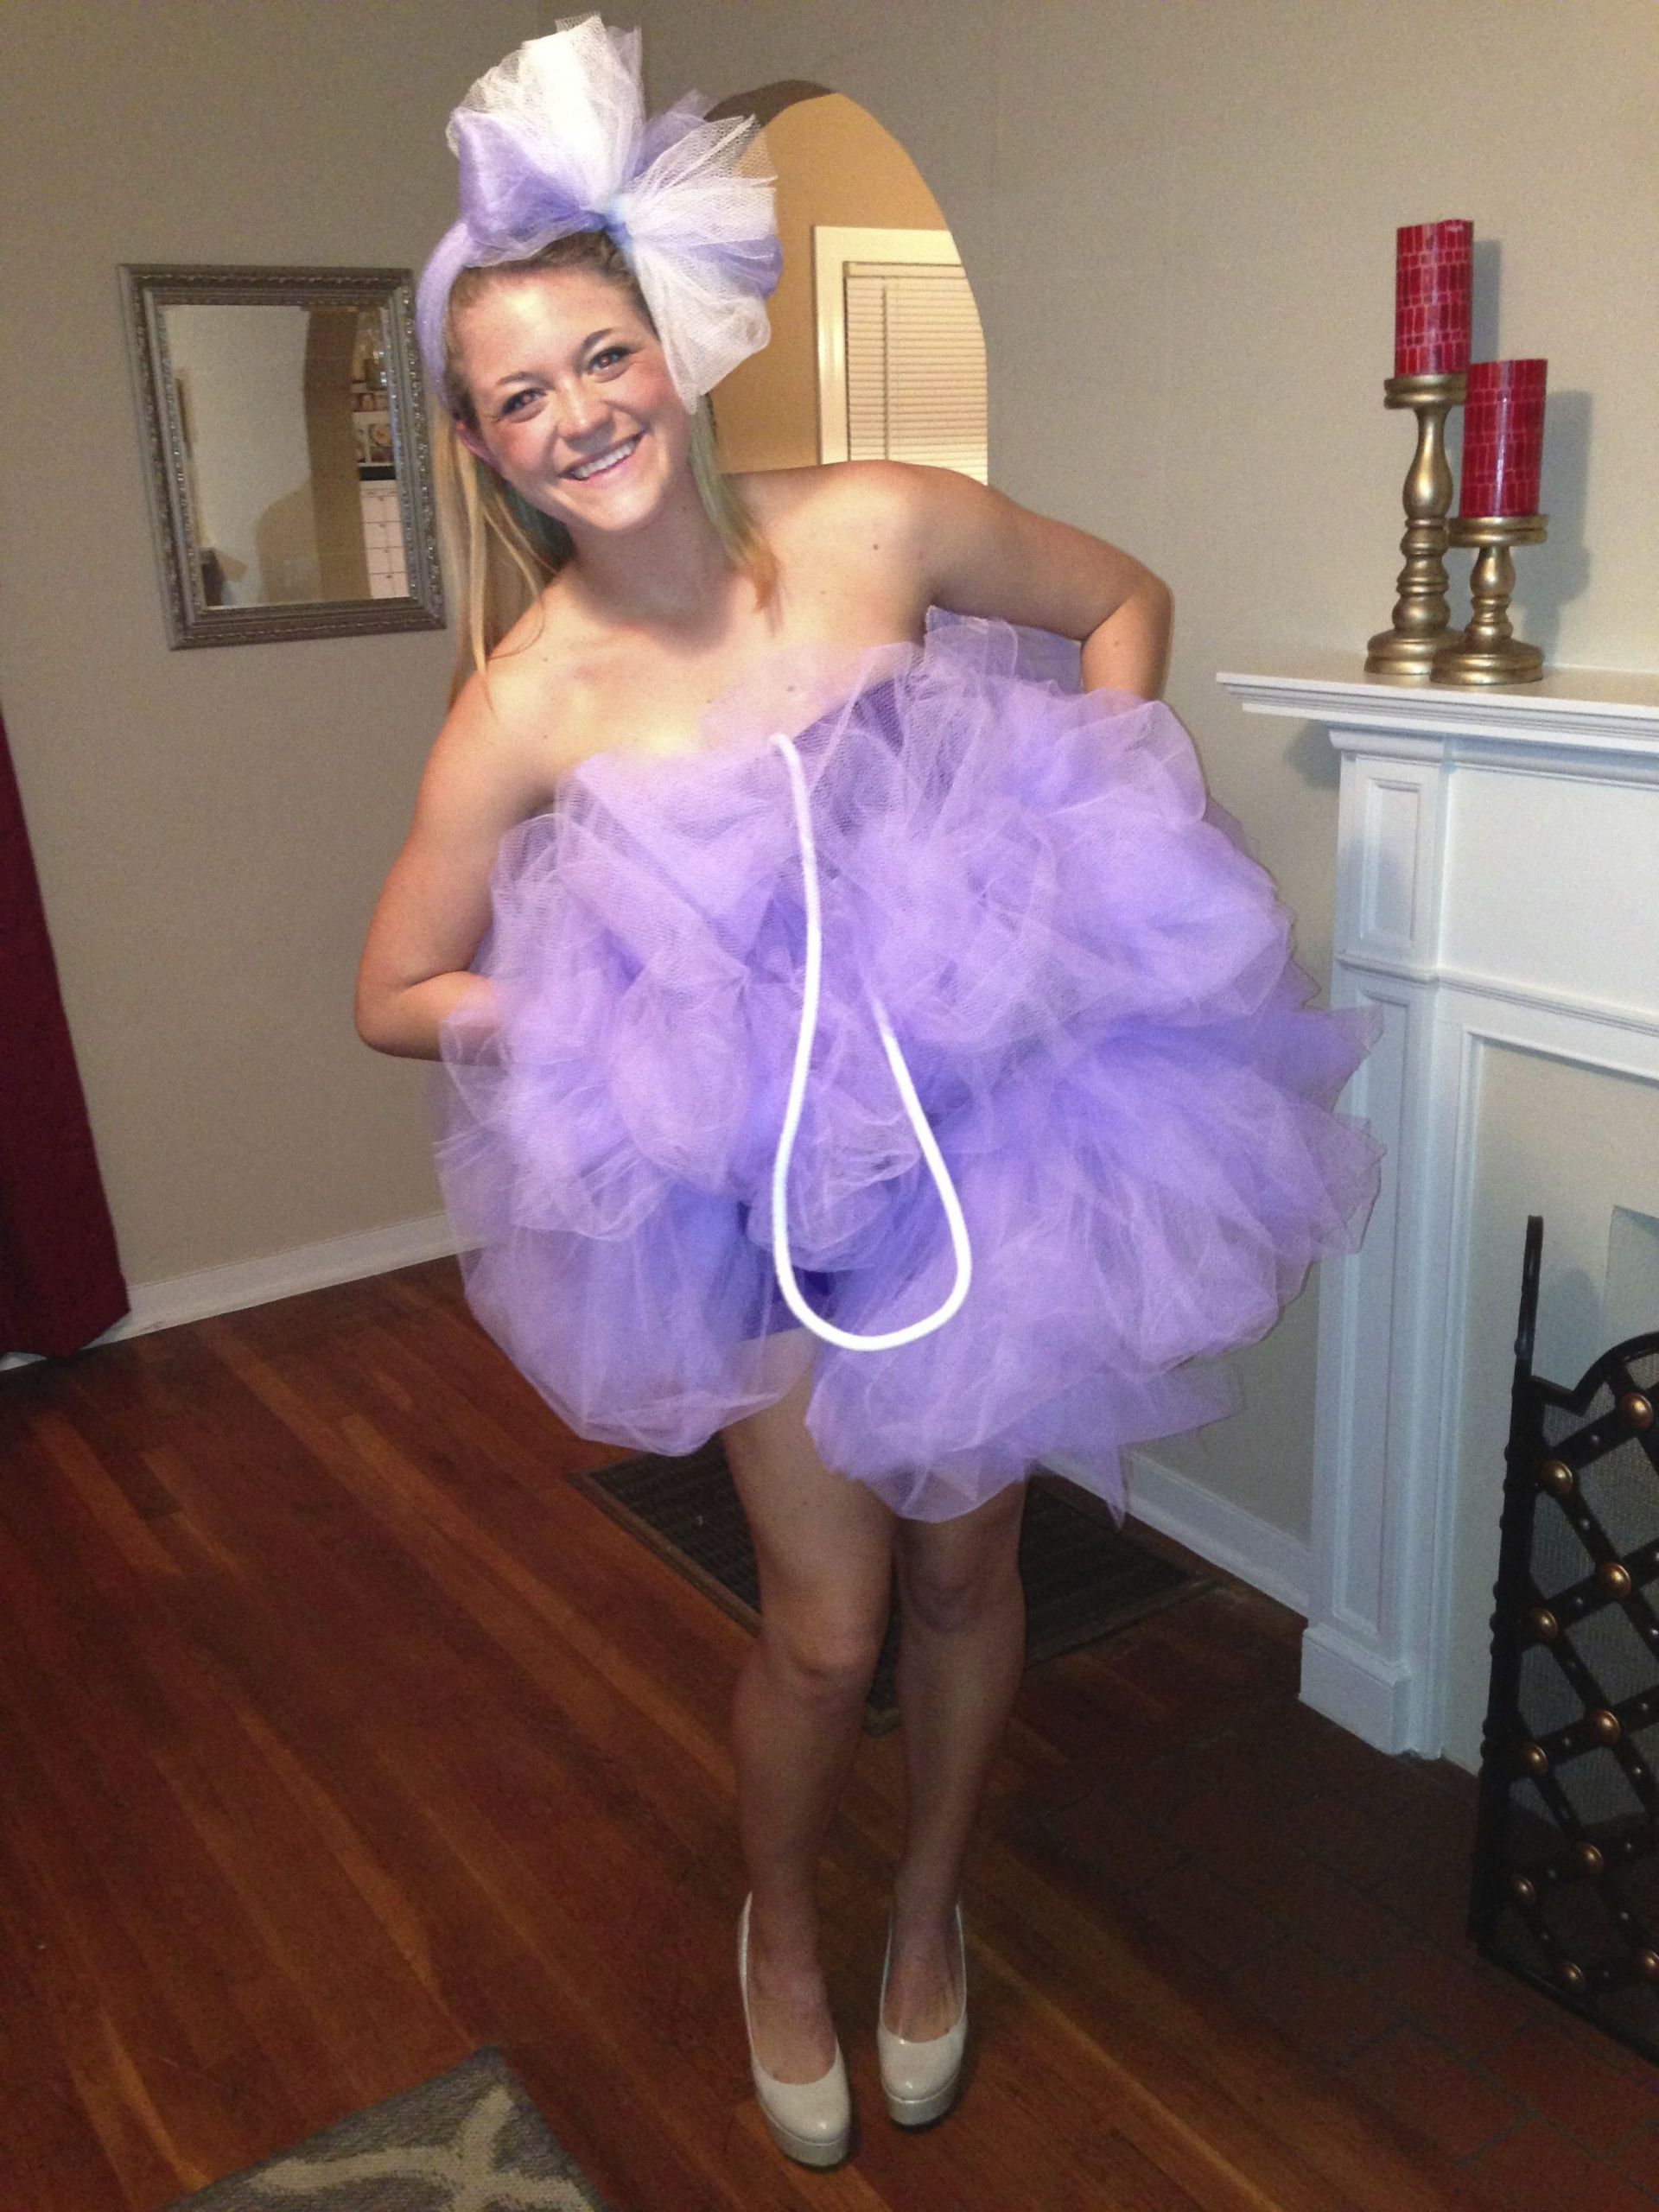 Loofah Costume DIY
 Loofah Costume attach tulle to a tank top and shorts for